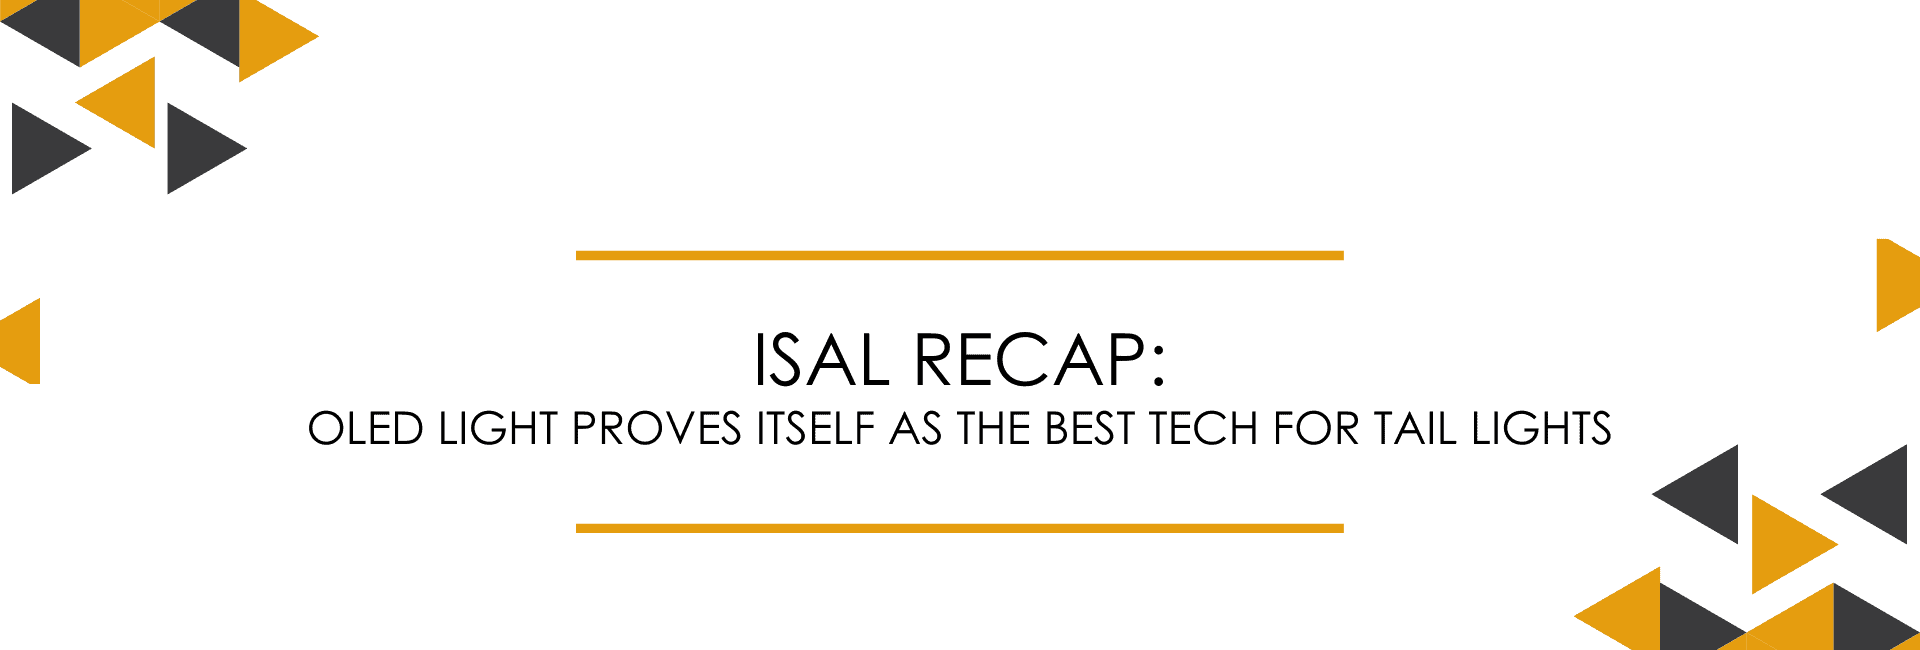 ISAL Recap: OLED Light Proves Itself as the Best Tech for Tail Lights